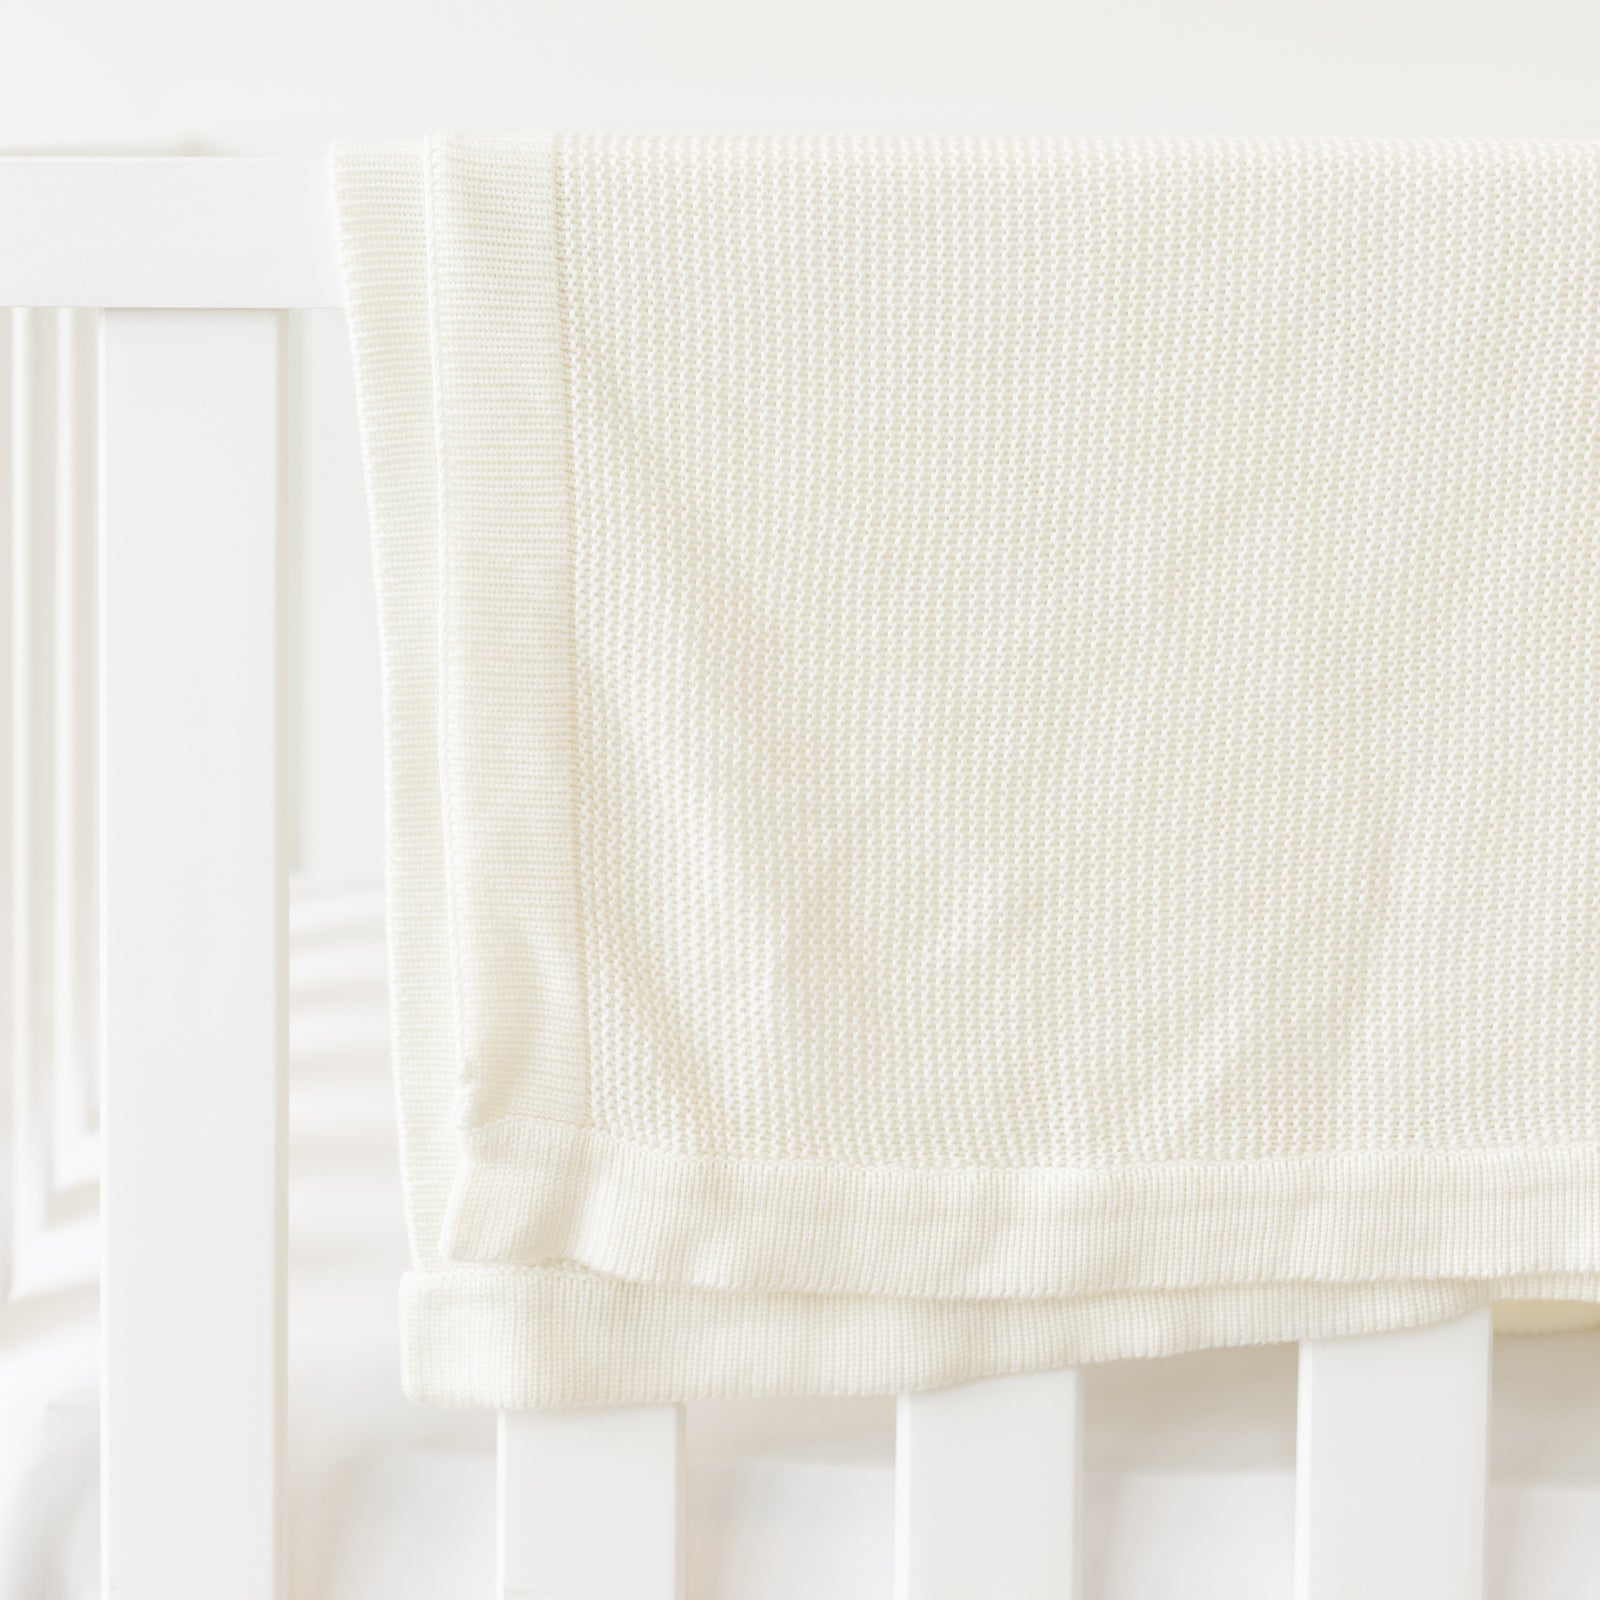 Ivory Cloud Knit Baby Blanket draped over crib 